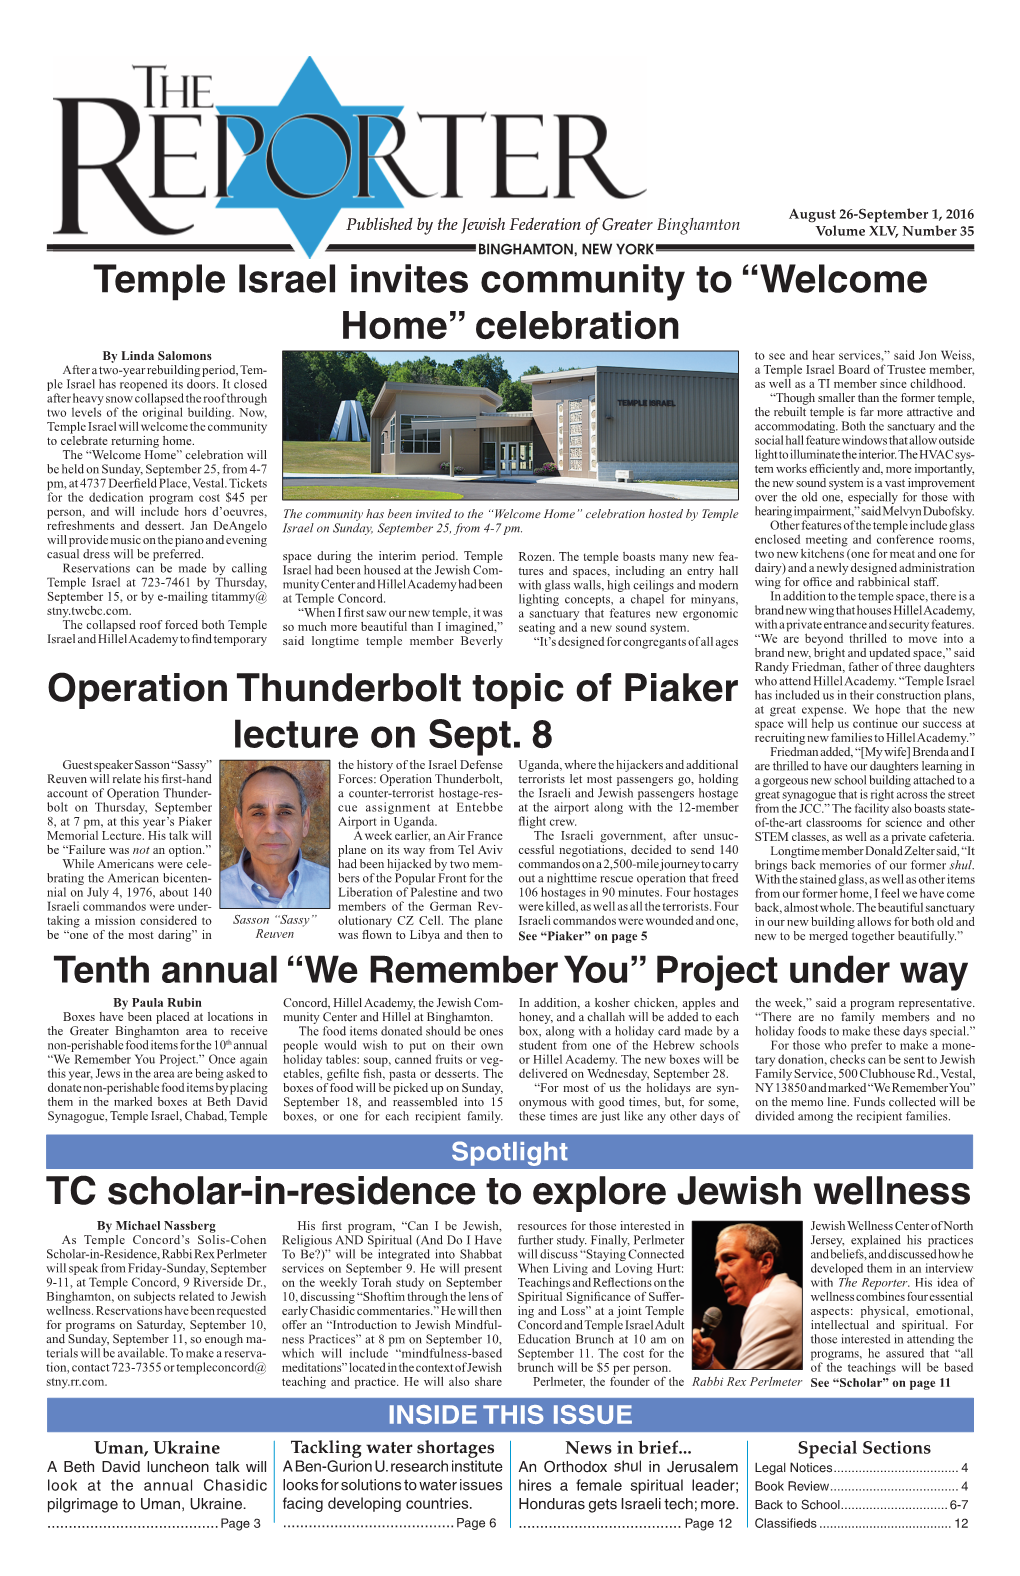 Temple Israel Invites Community to “Welcome Home”